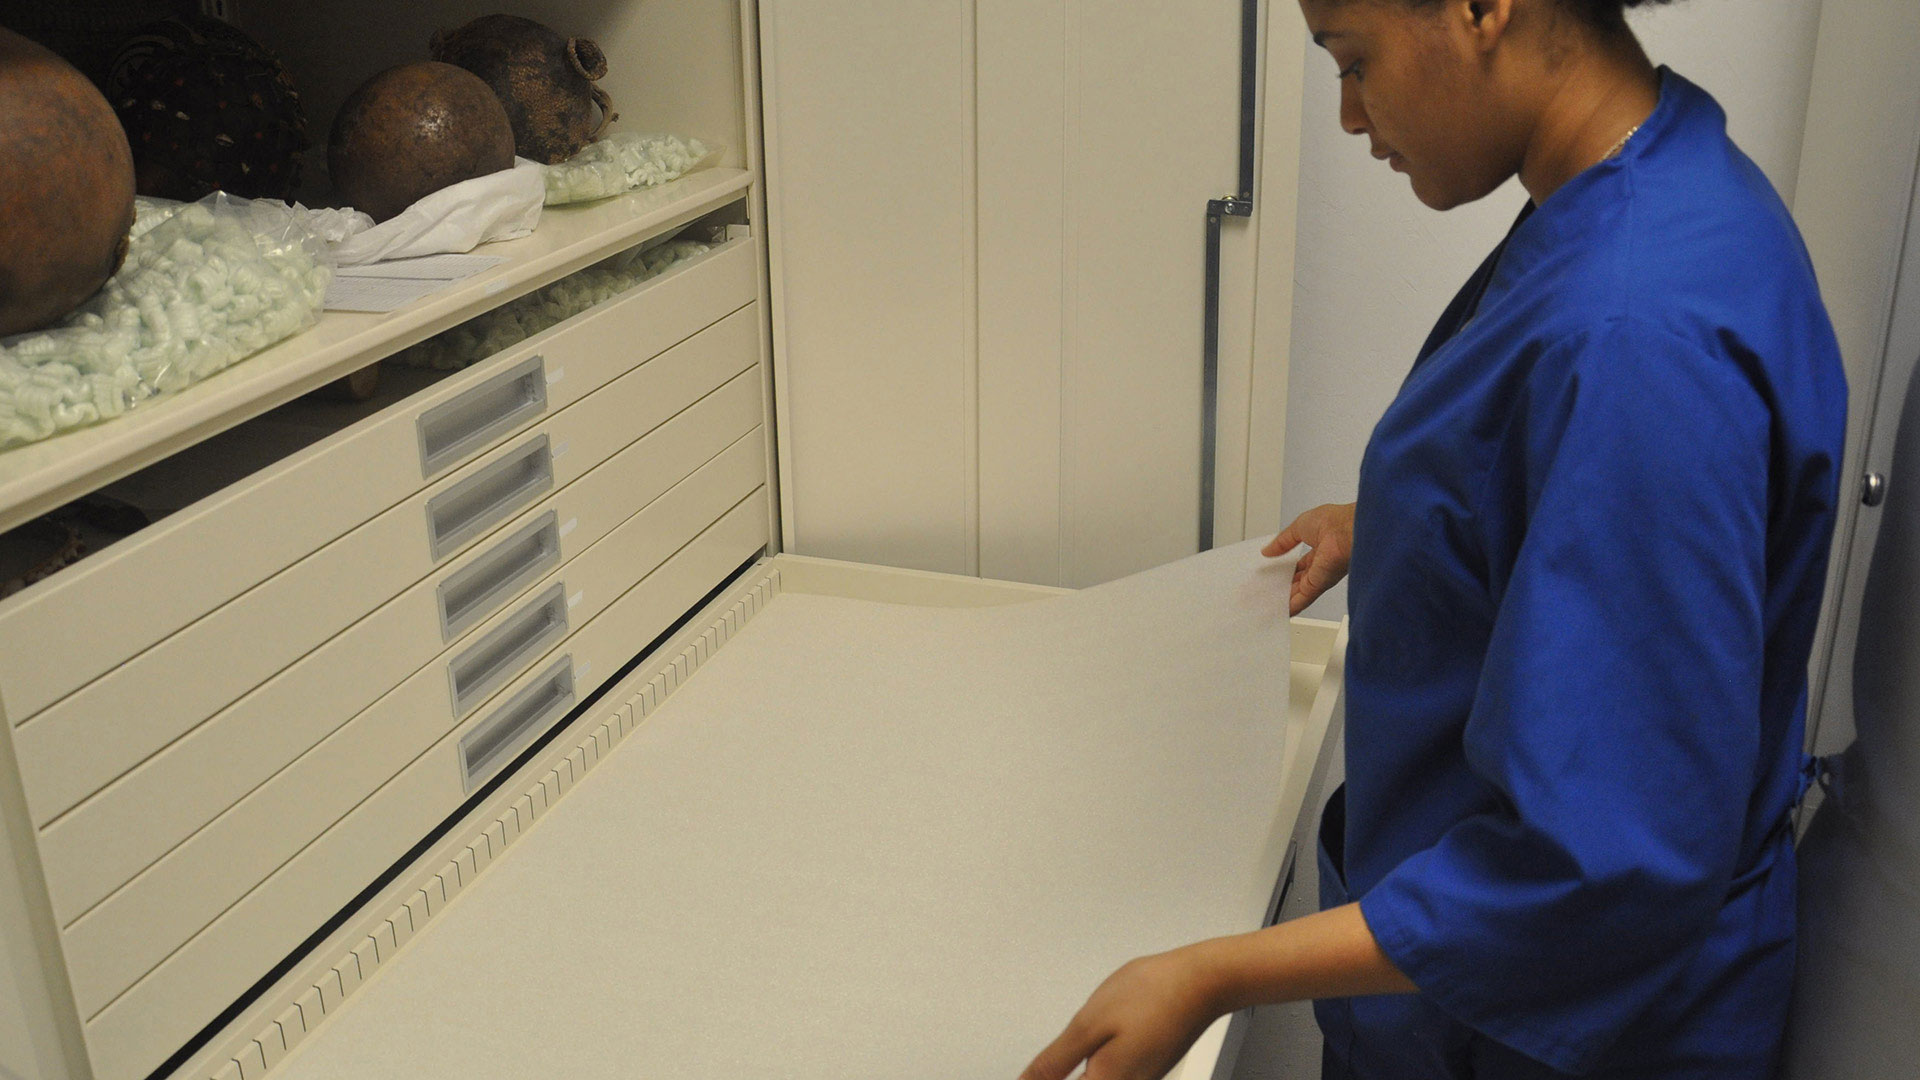 A woman in a blue smock lays a thin sheet of white-colored foam down within an opened drawer.